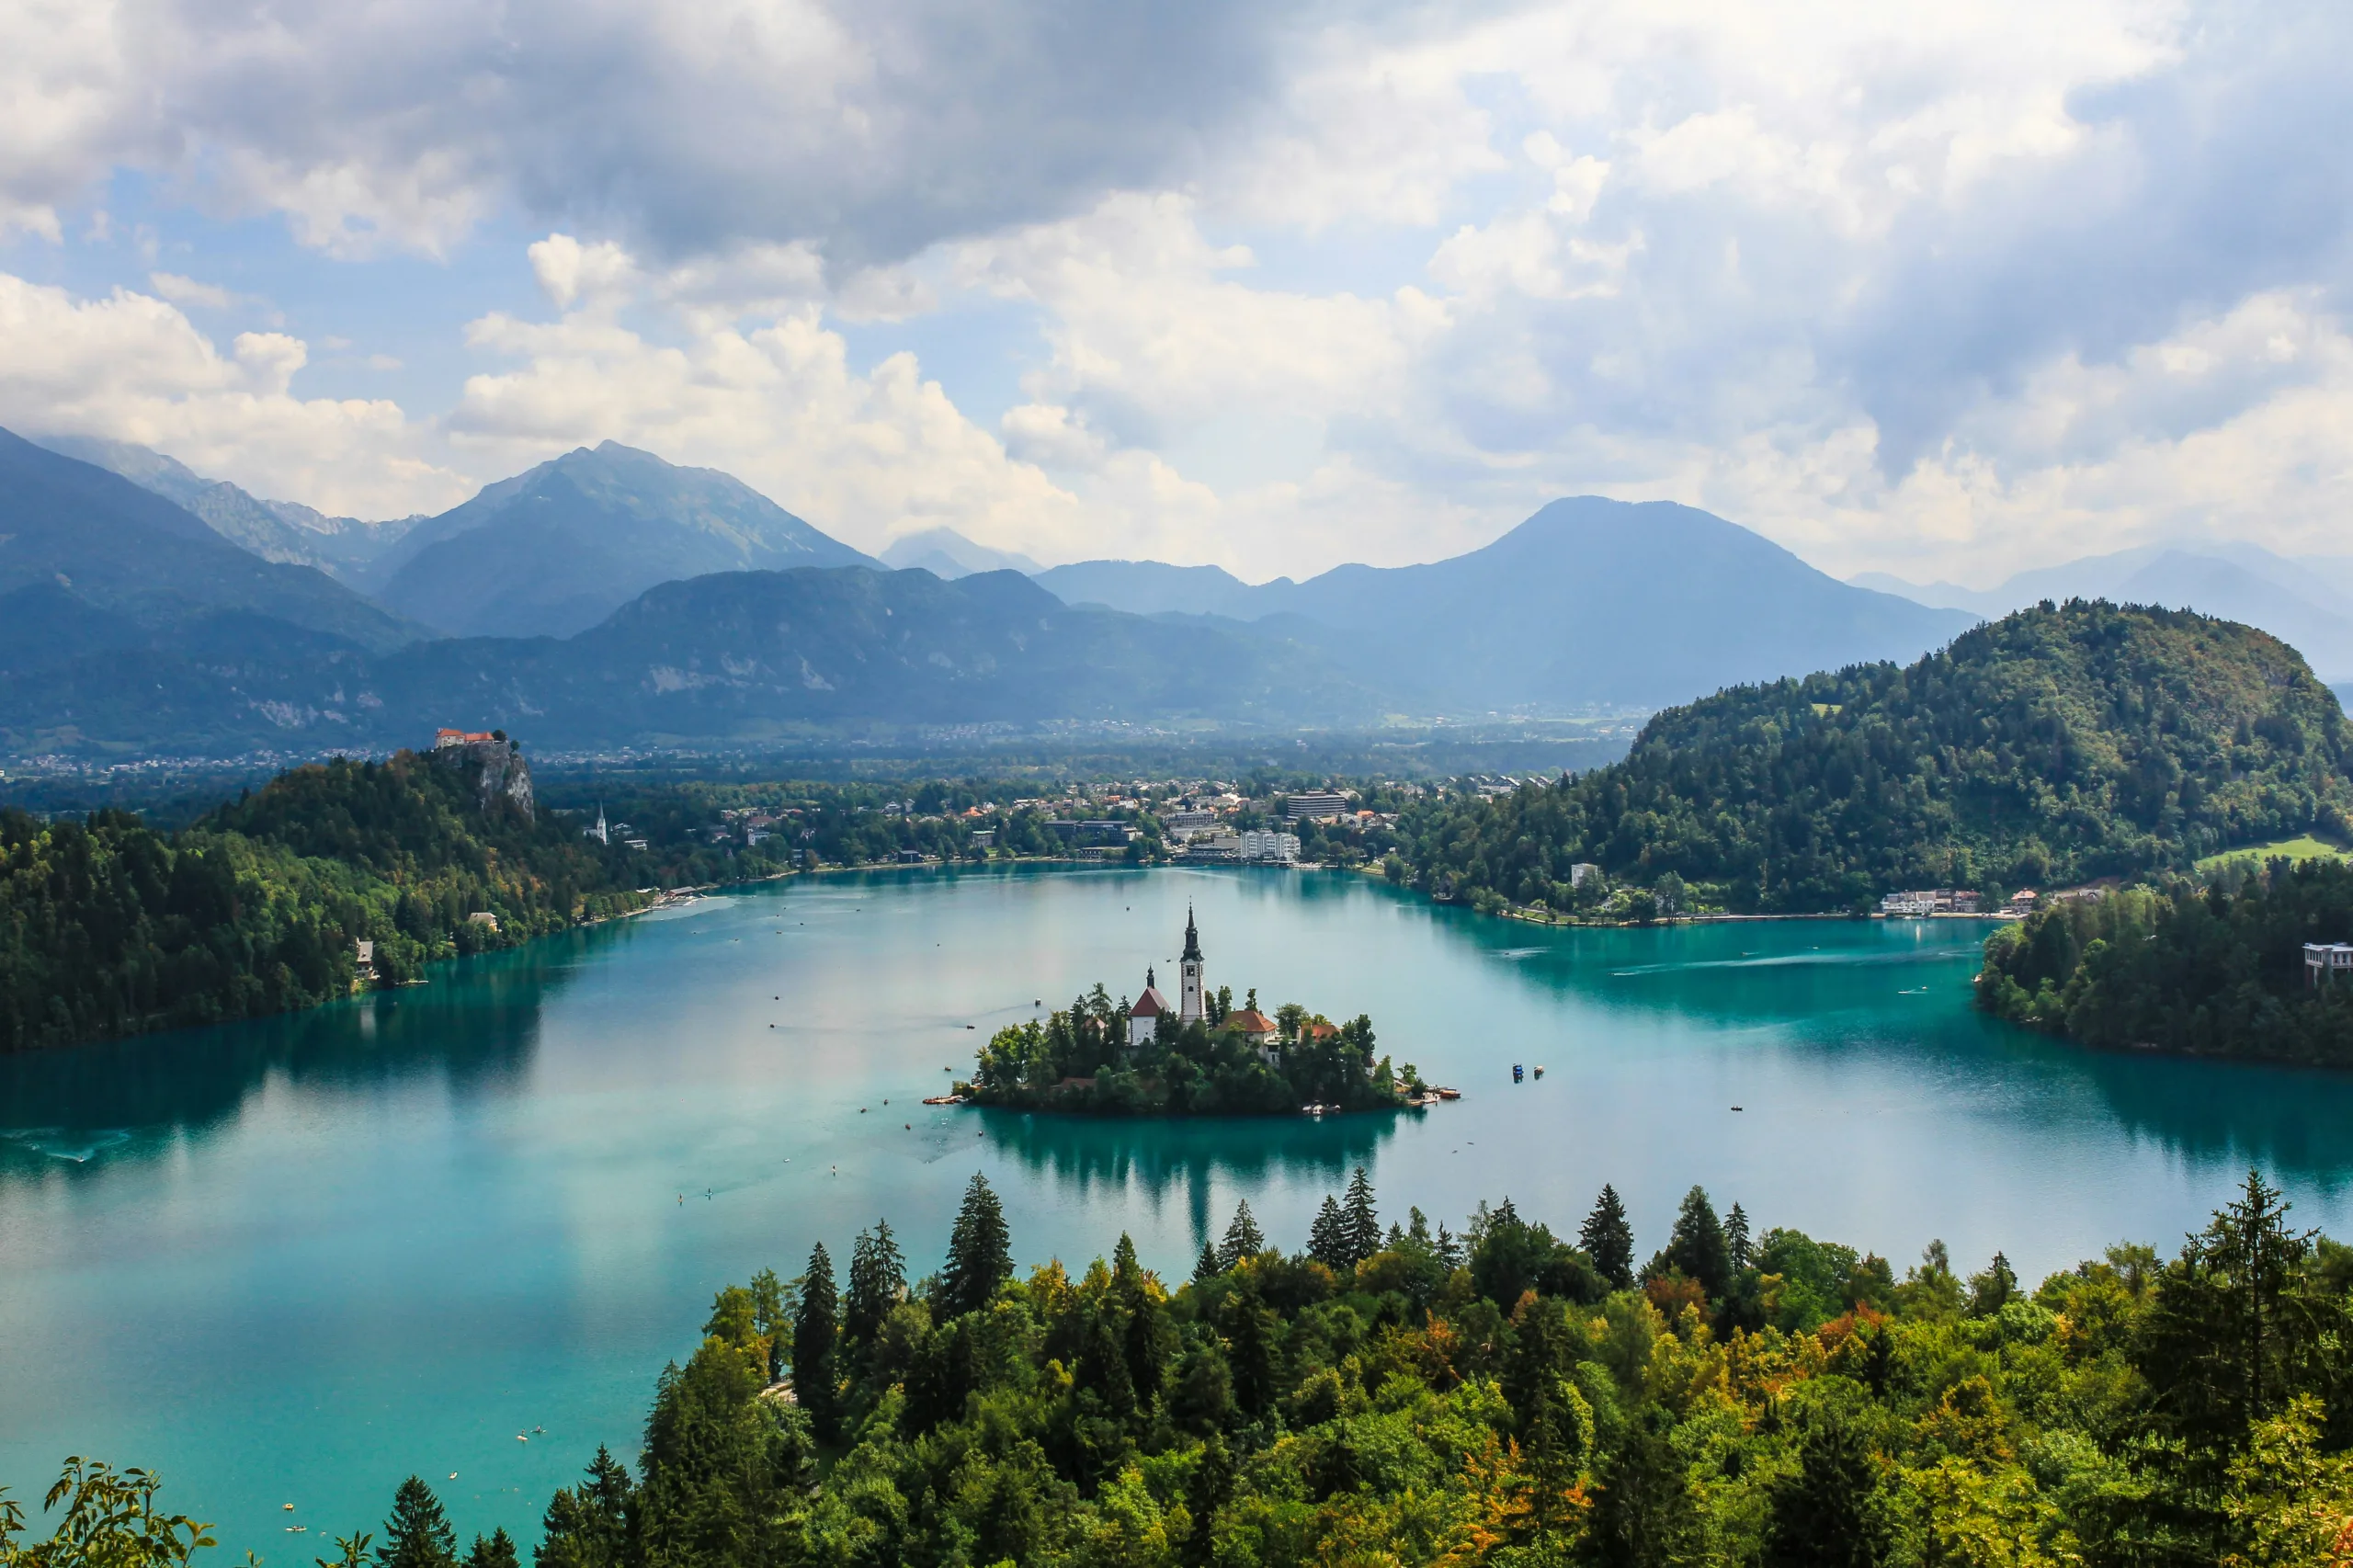 Lake Bled in slovenia. A picture of the church and lake from above.